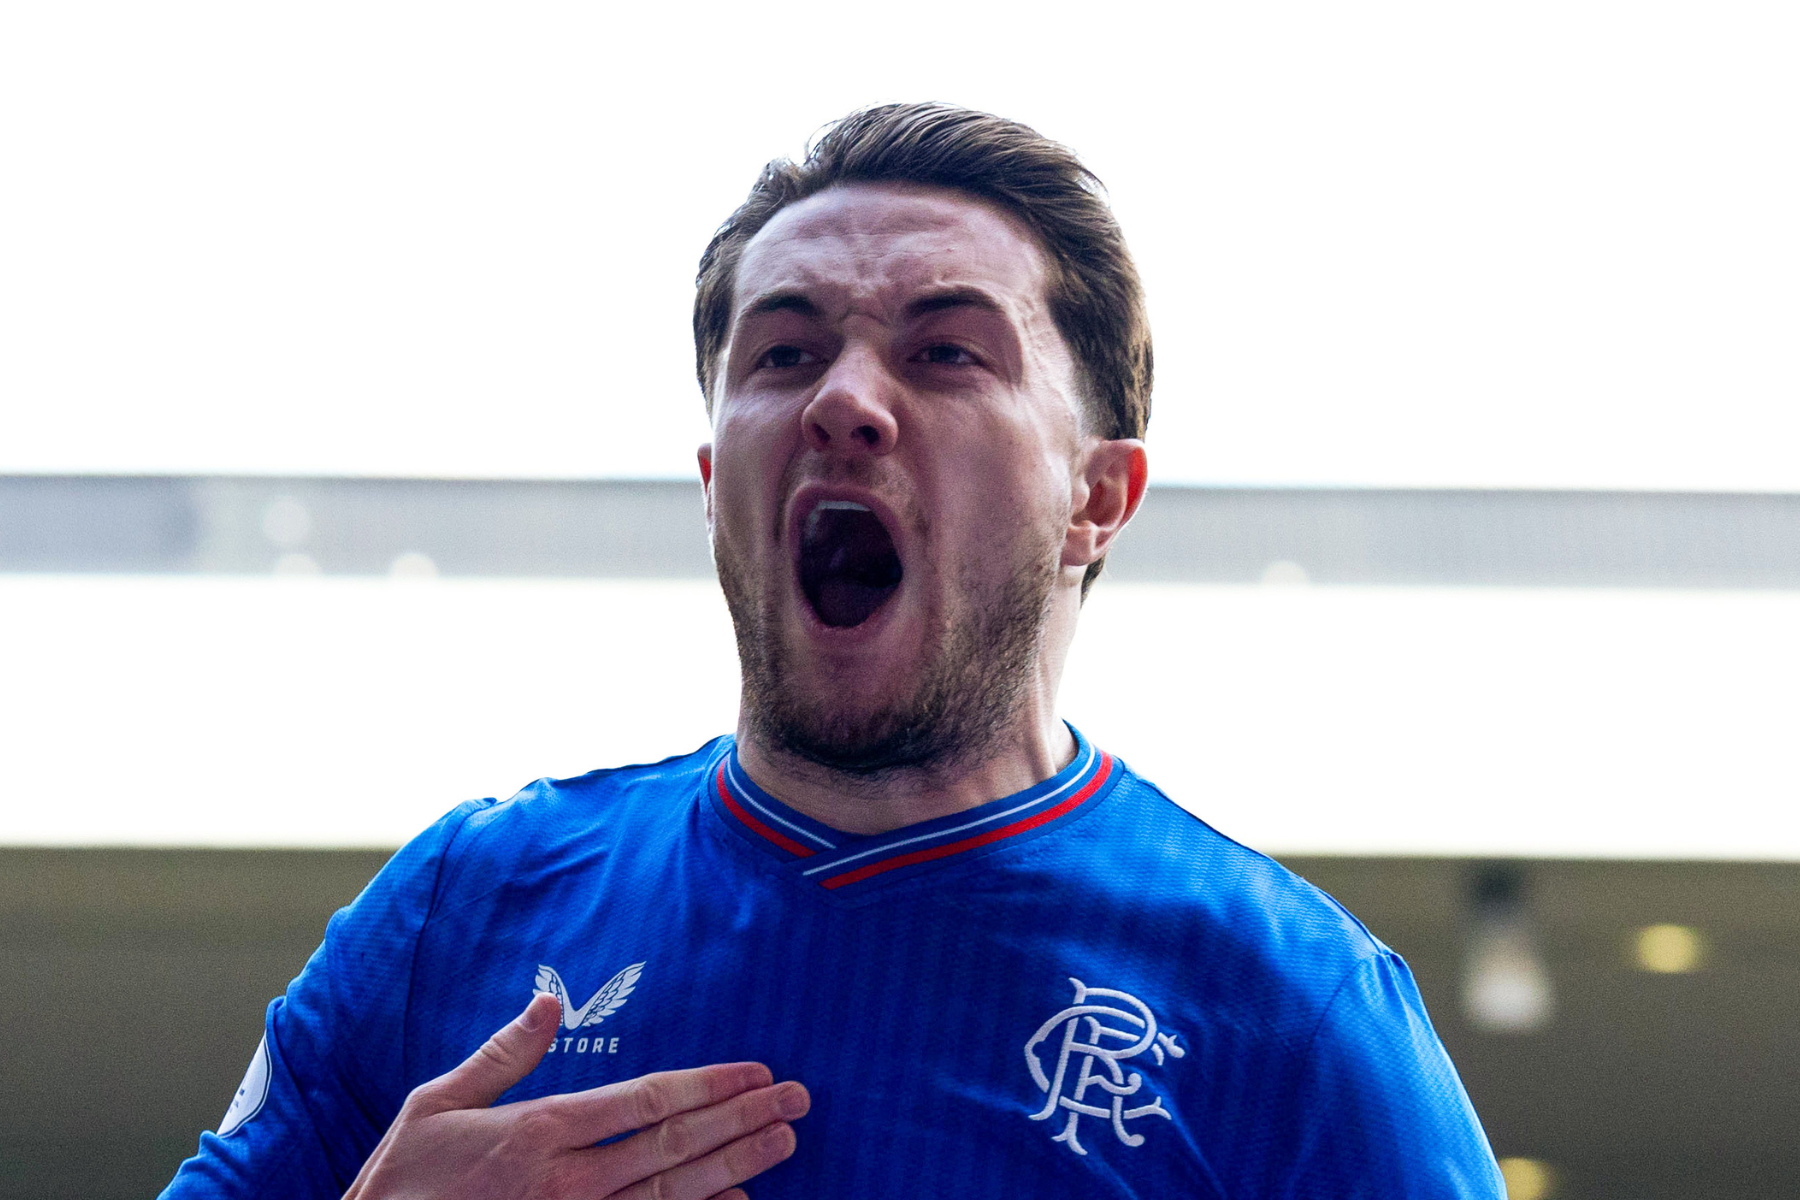 Wright brands Rangers speculation irrelevant in Scottish Cup message